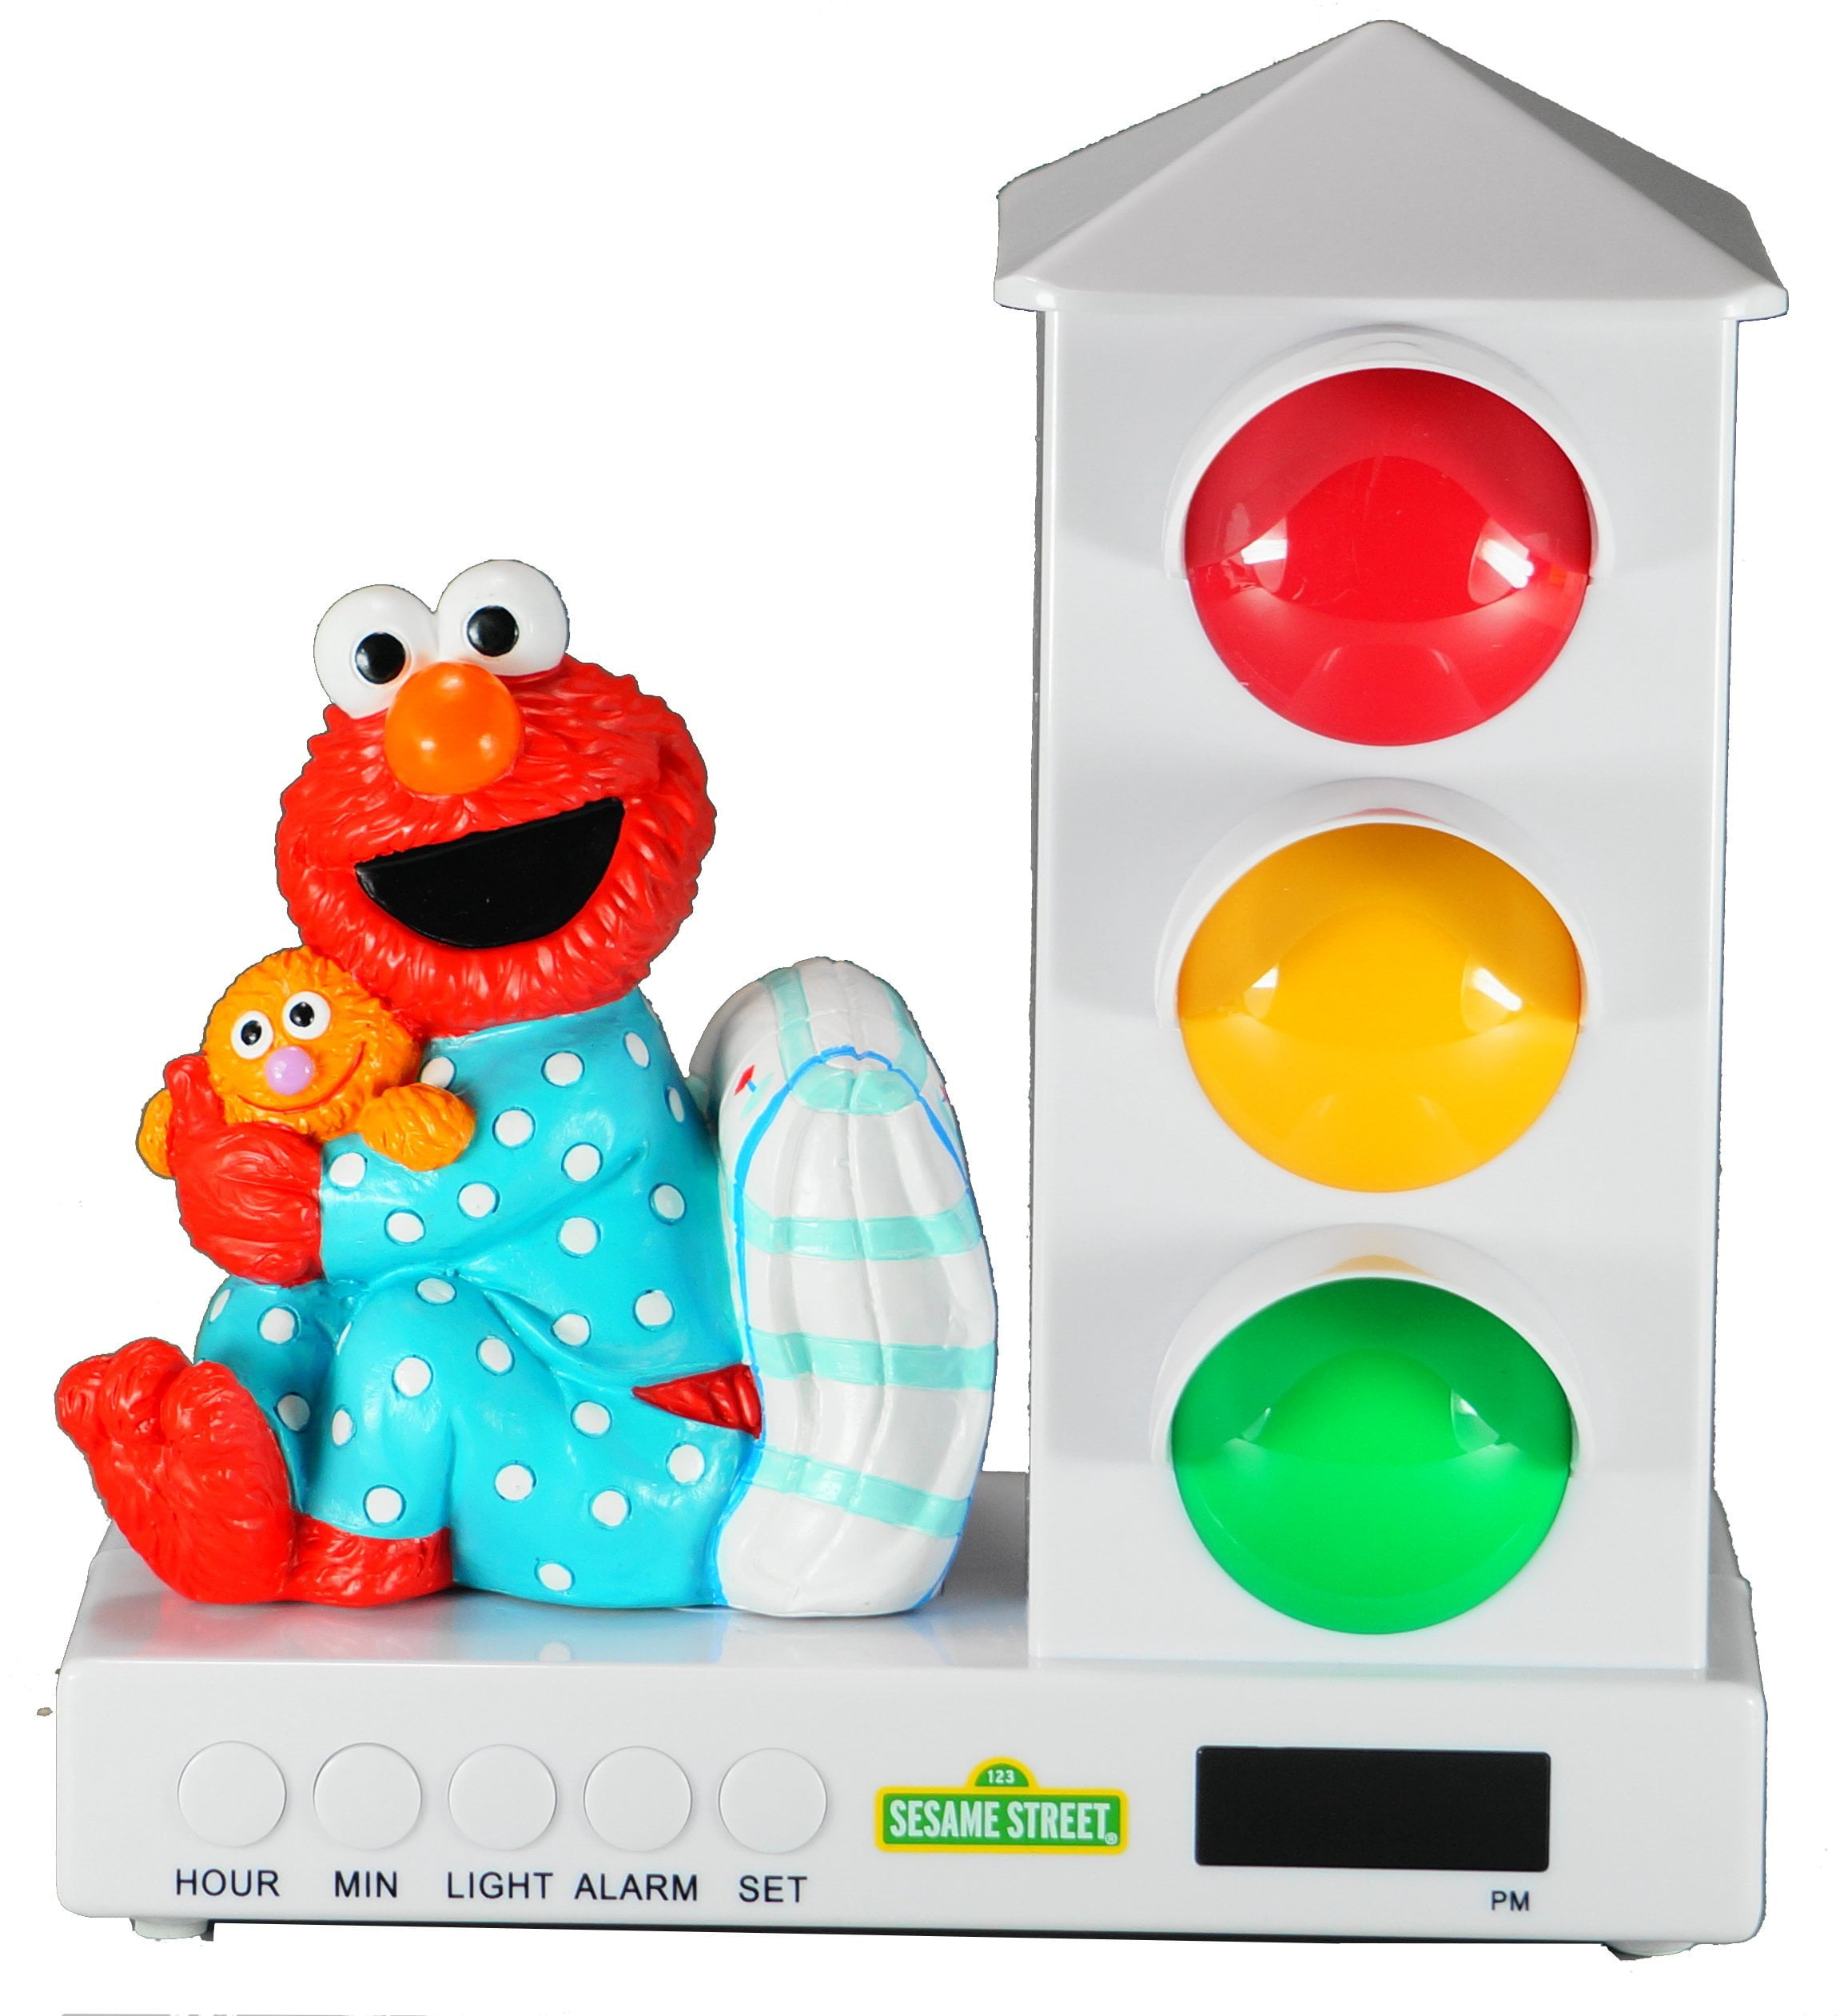 Its About Time Stoplight Sleep Enhancing Alarm Clock for Kids Red and Blue Sports Car